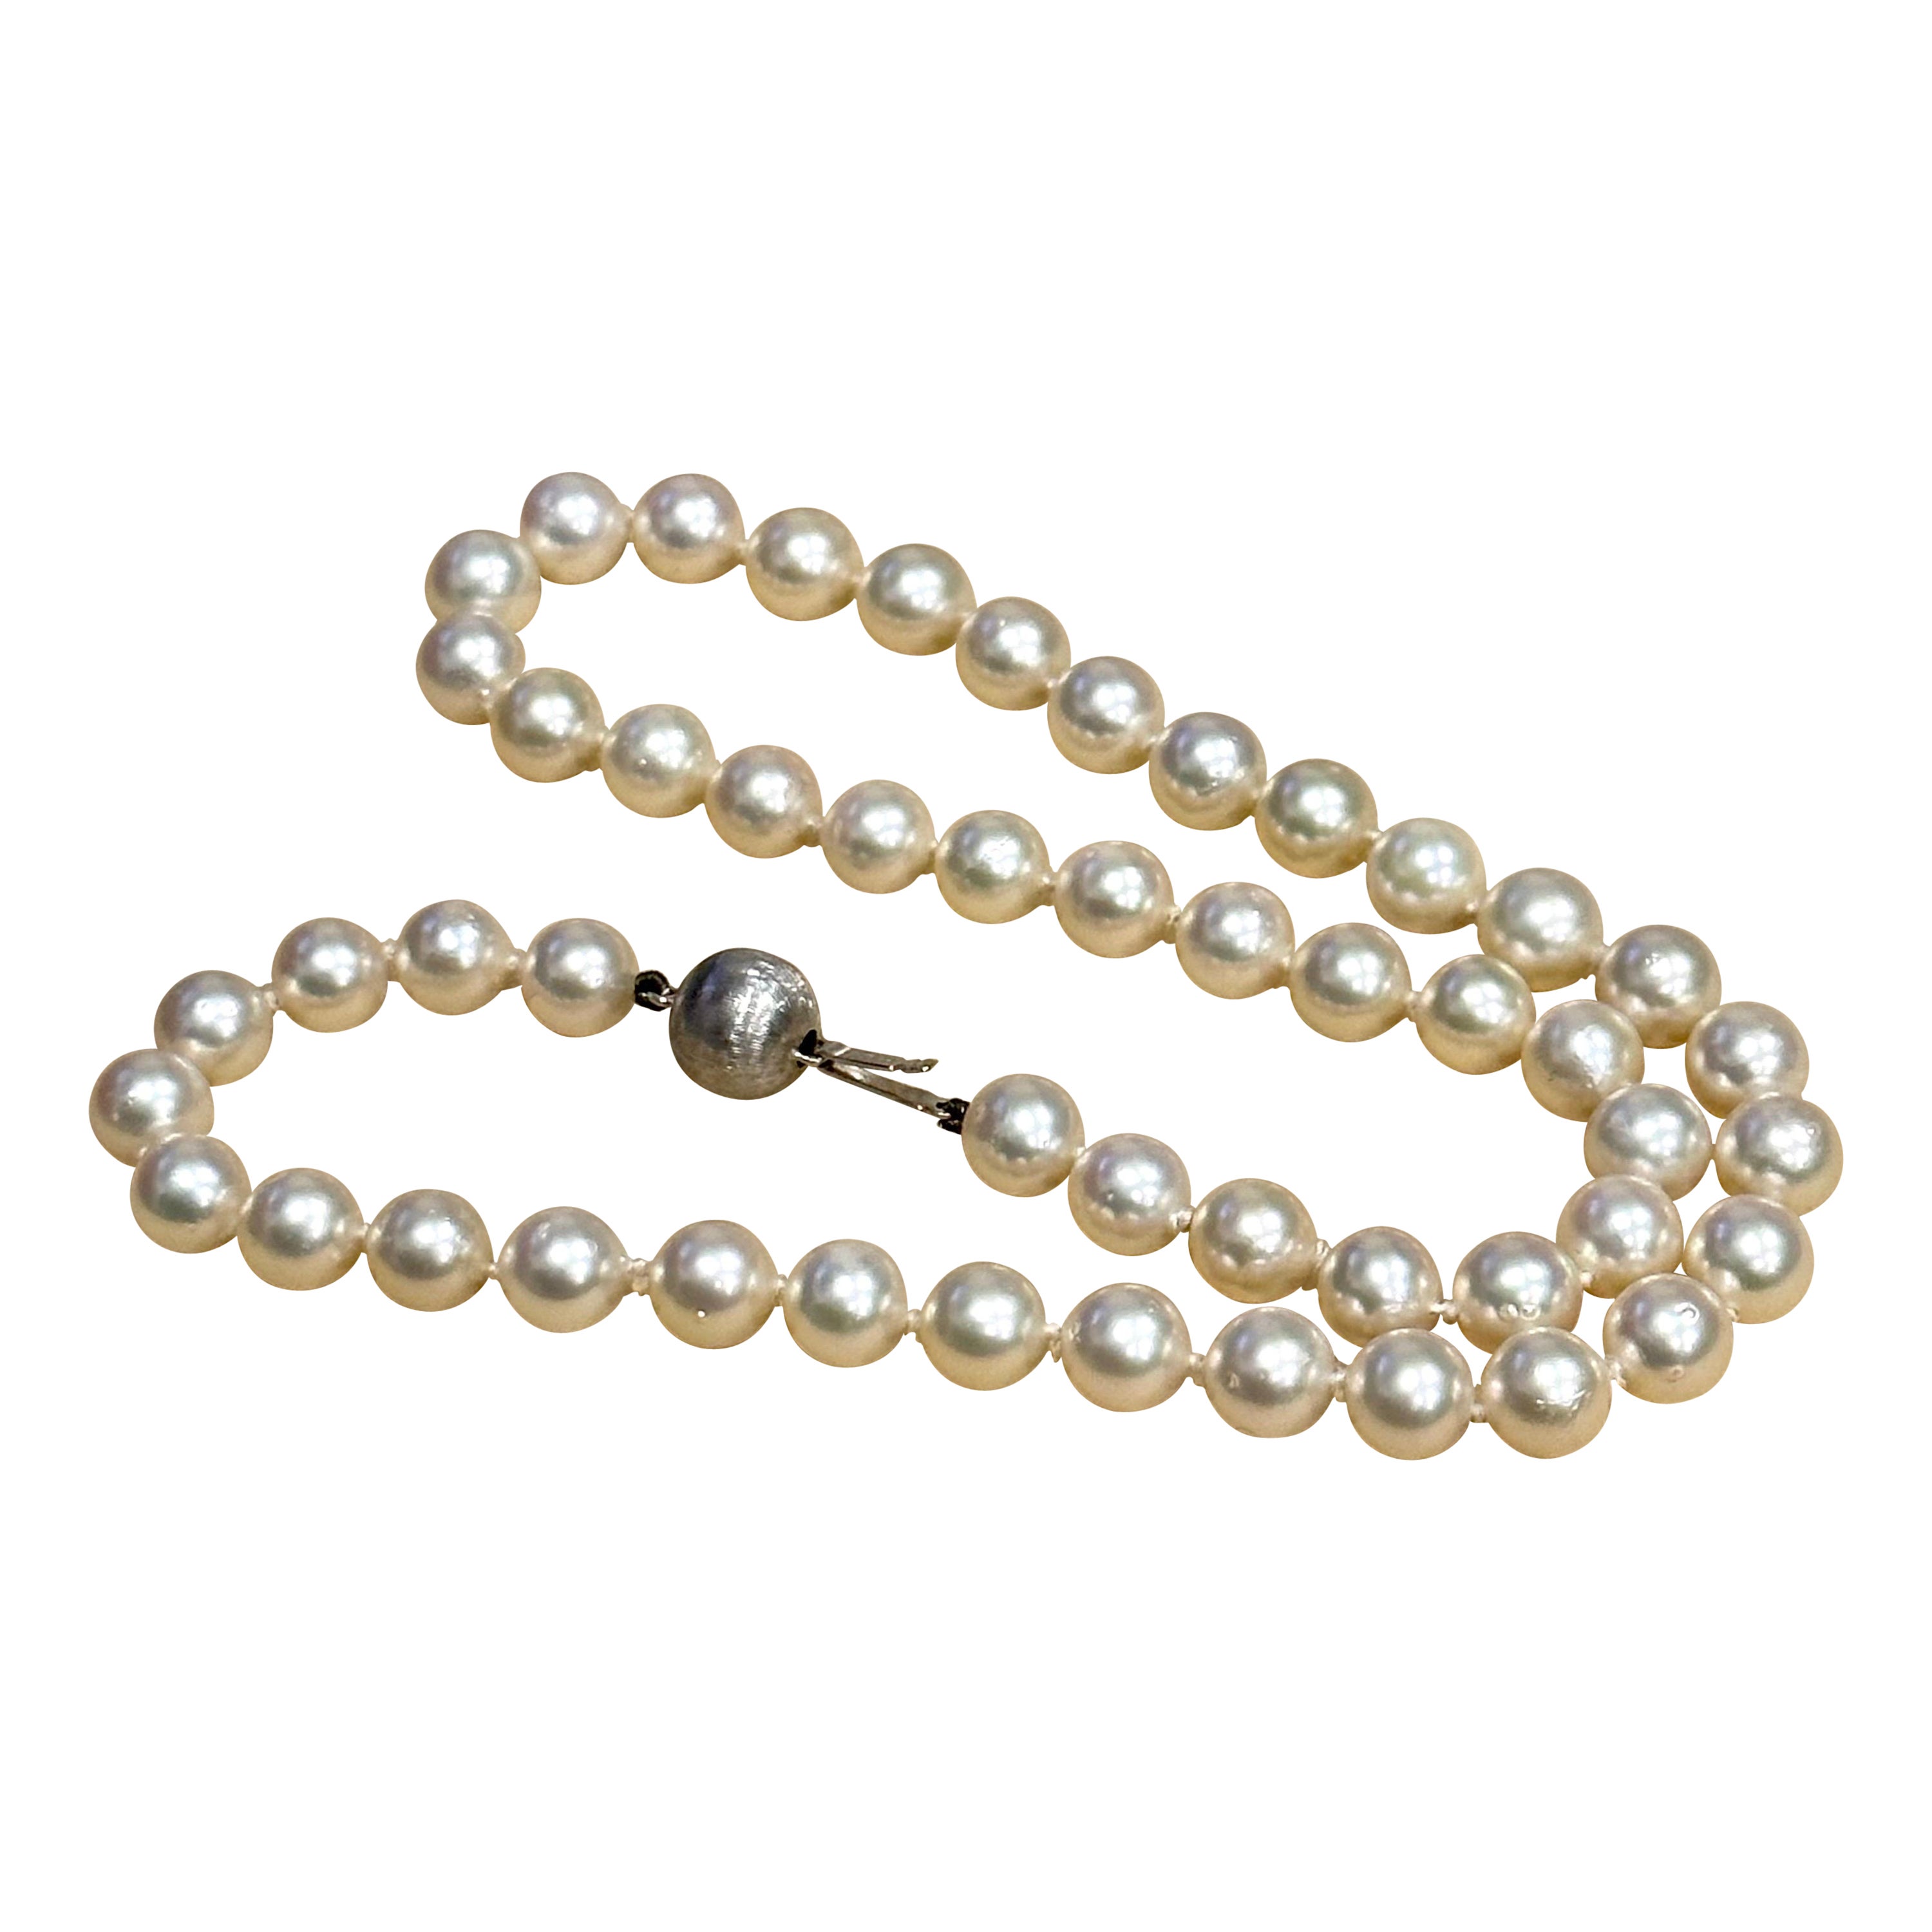 Vintage Cultured Akoya Pearl  Necklace Length 18" , 18 Karat  White Gold Clasp For Sale